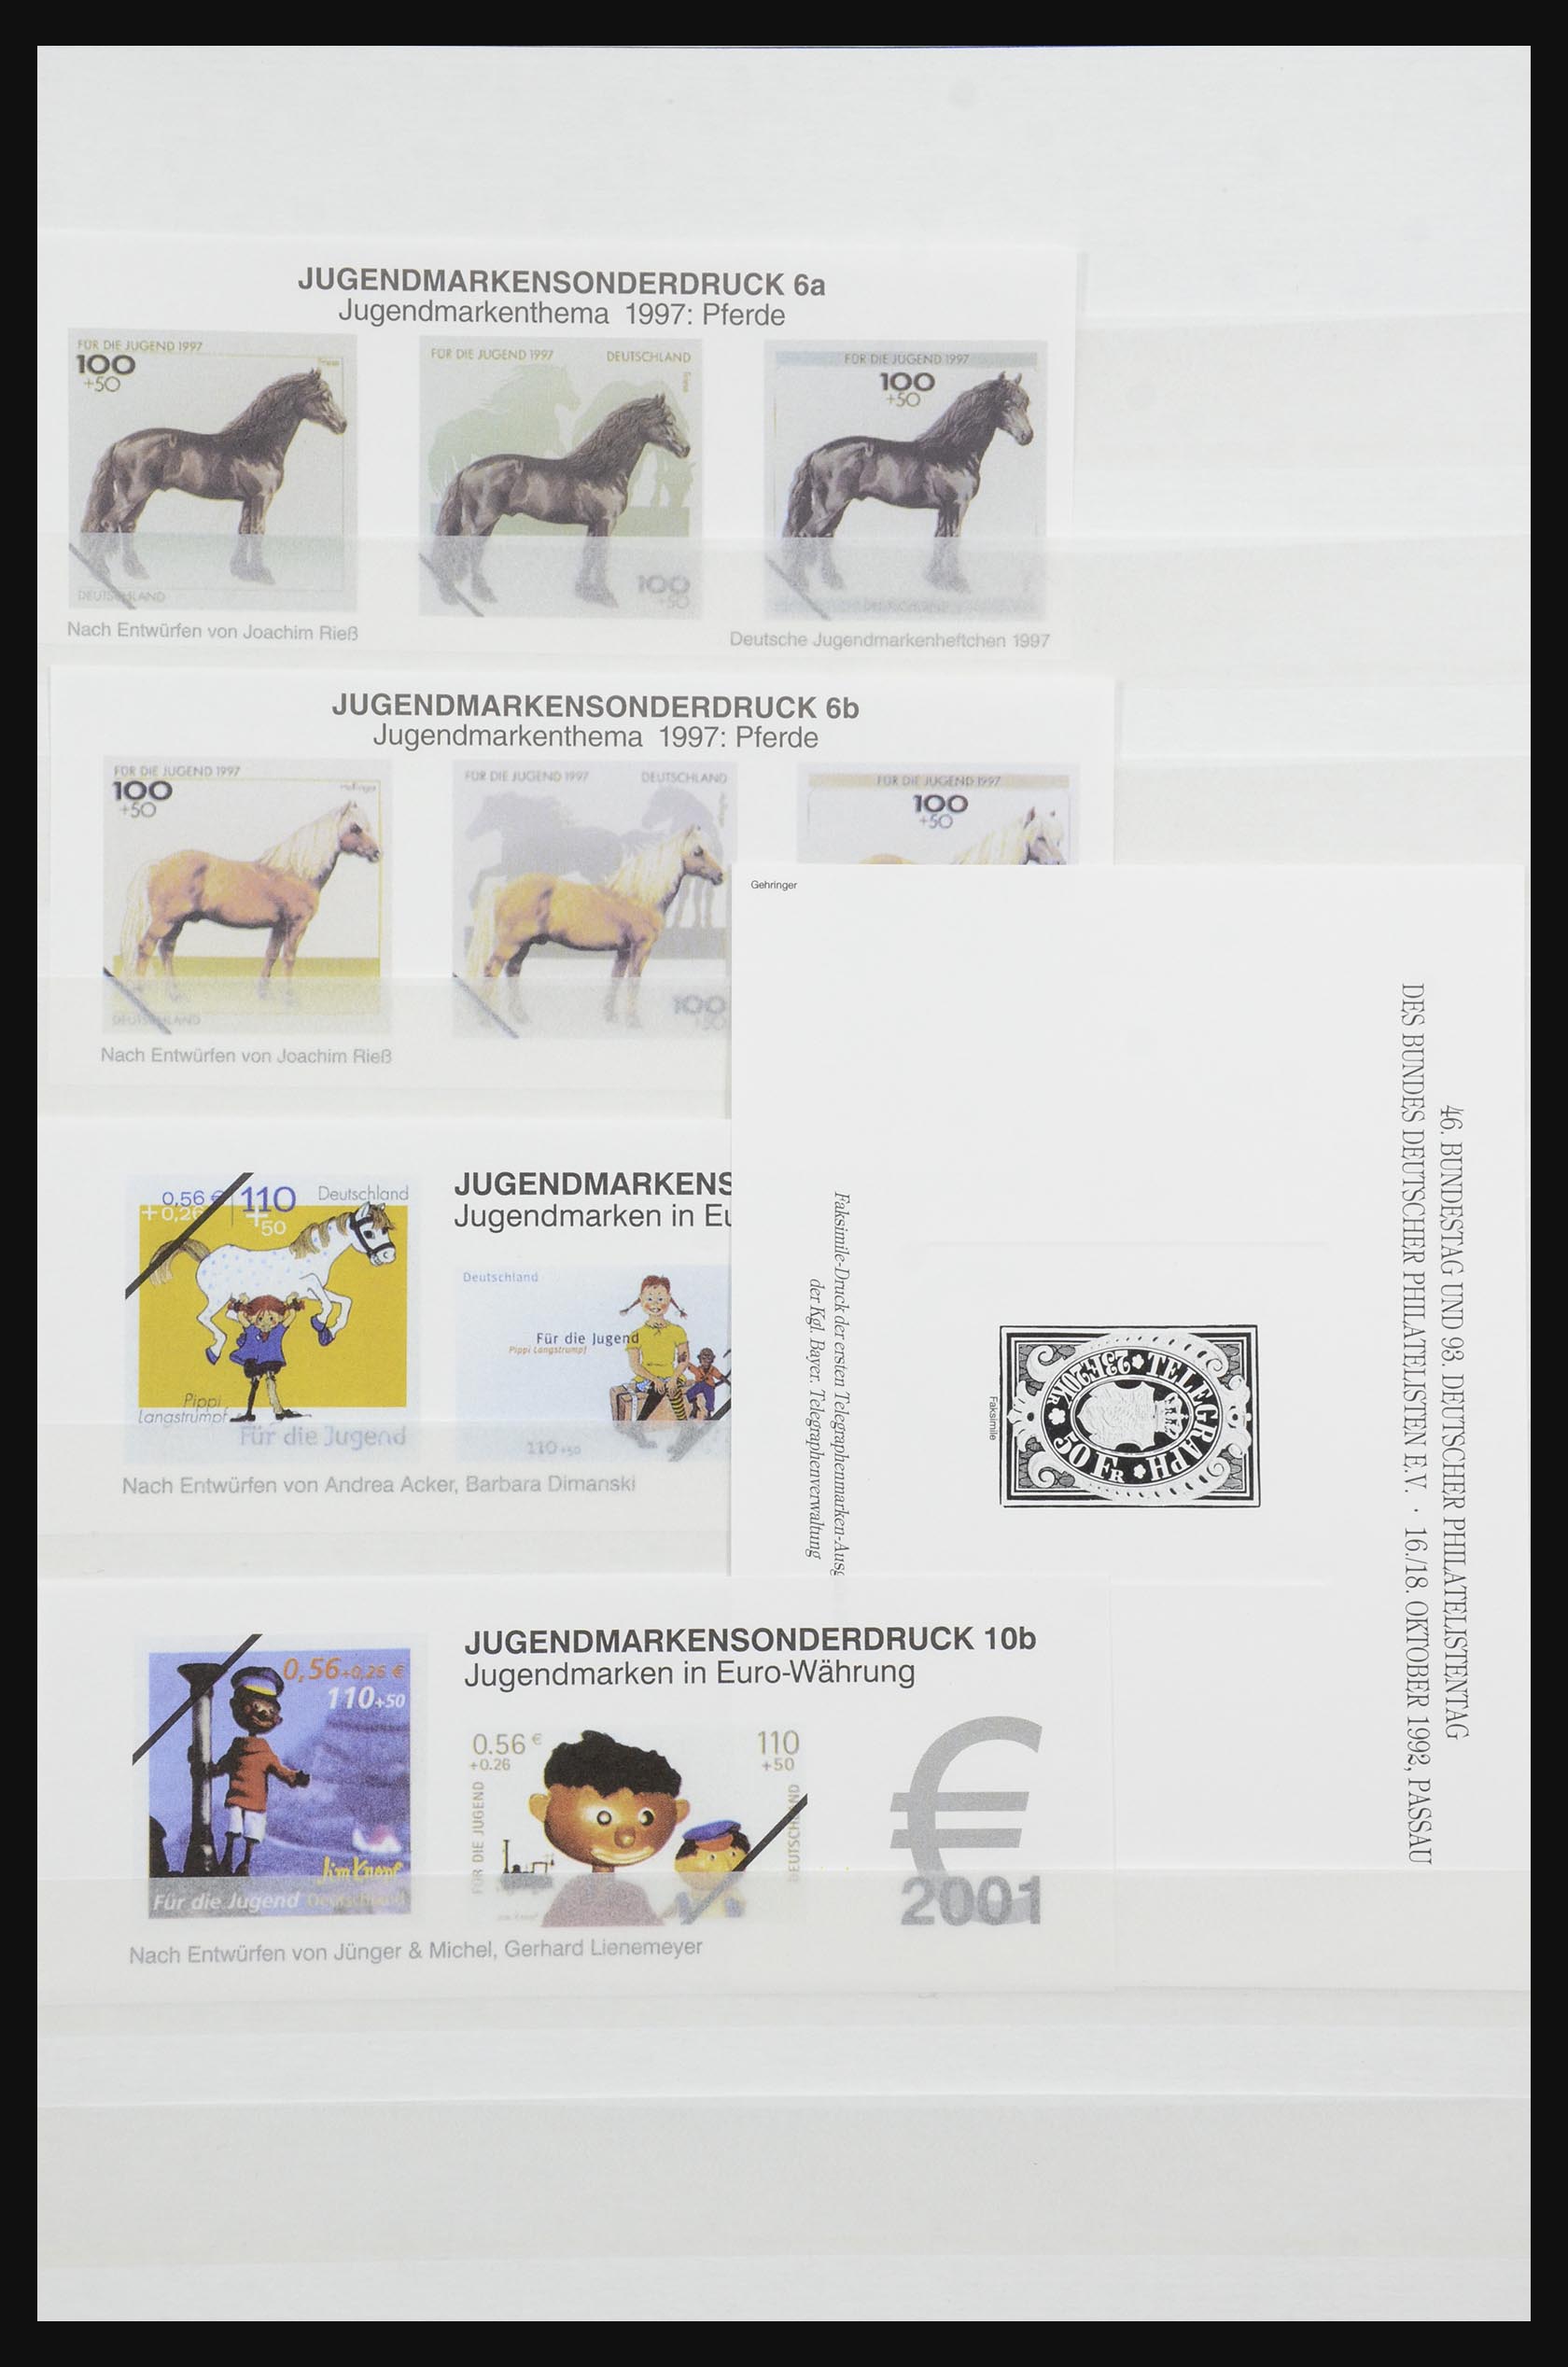 32050 019 - 32050 Bundespost special sheets 1980-2010.